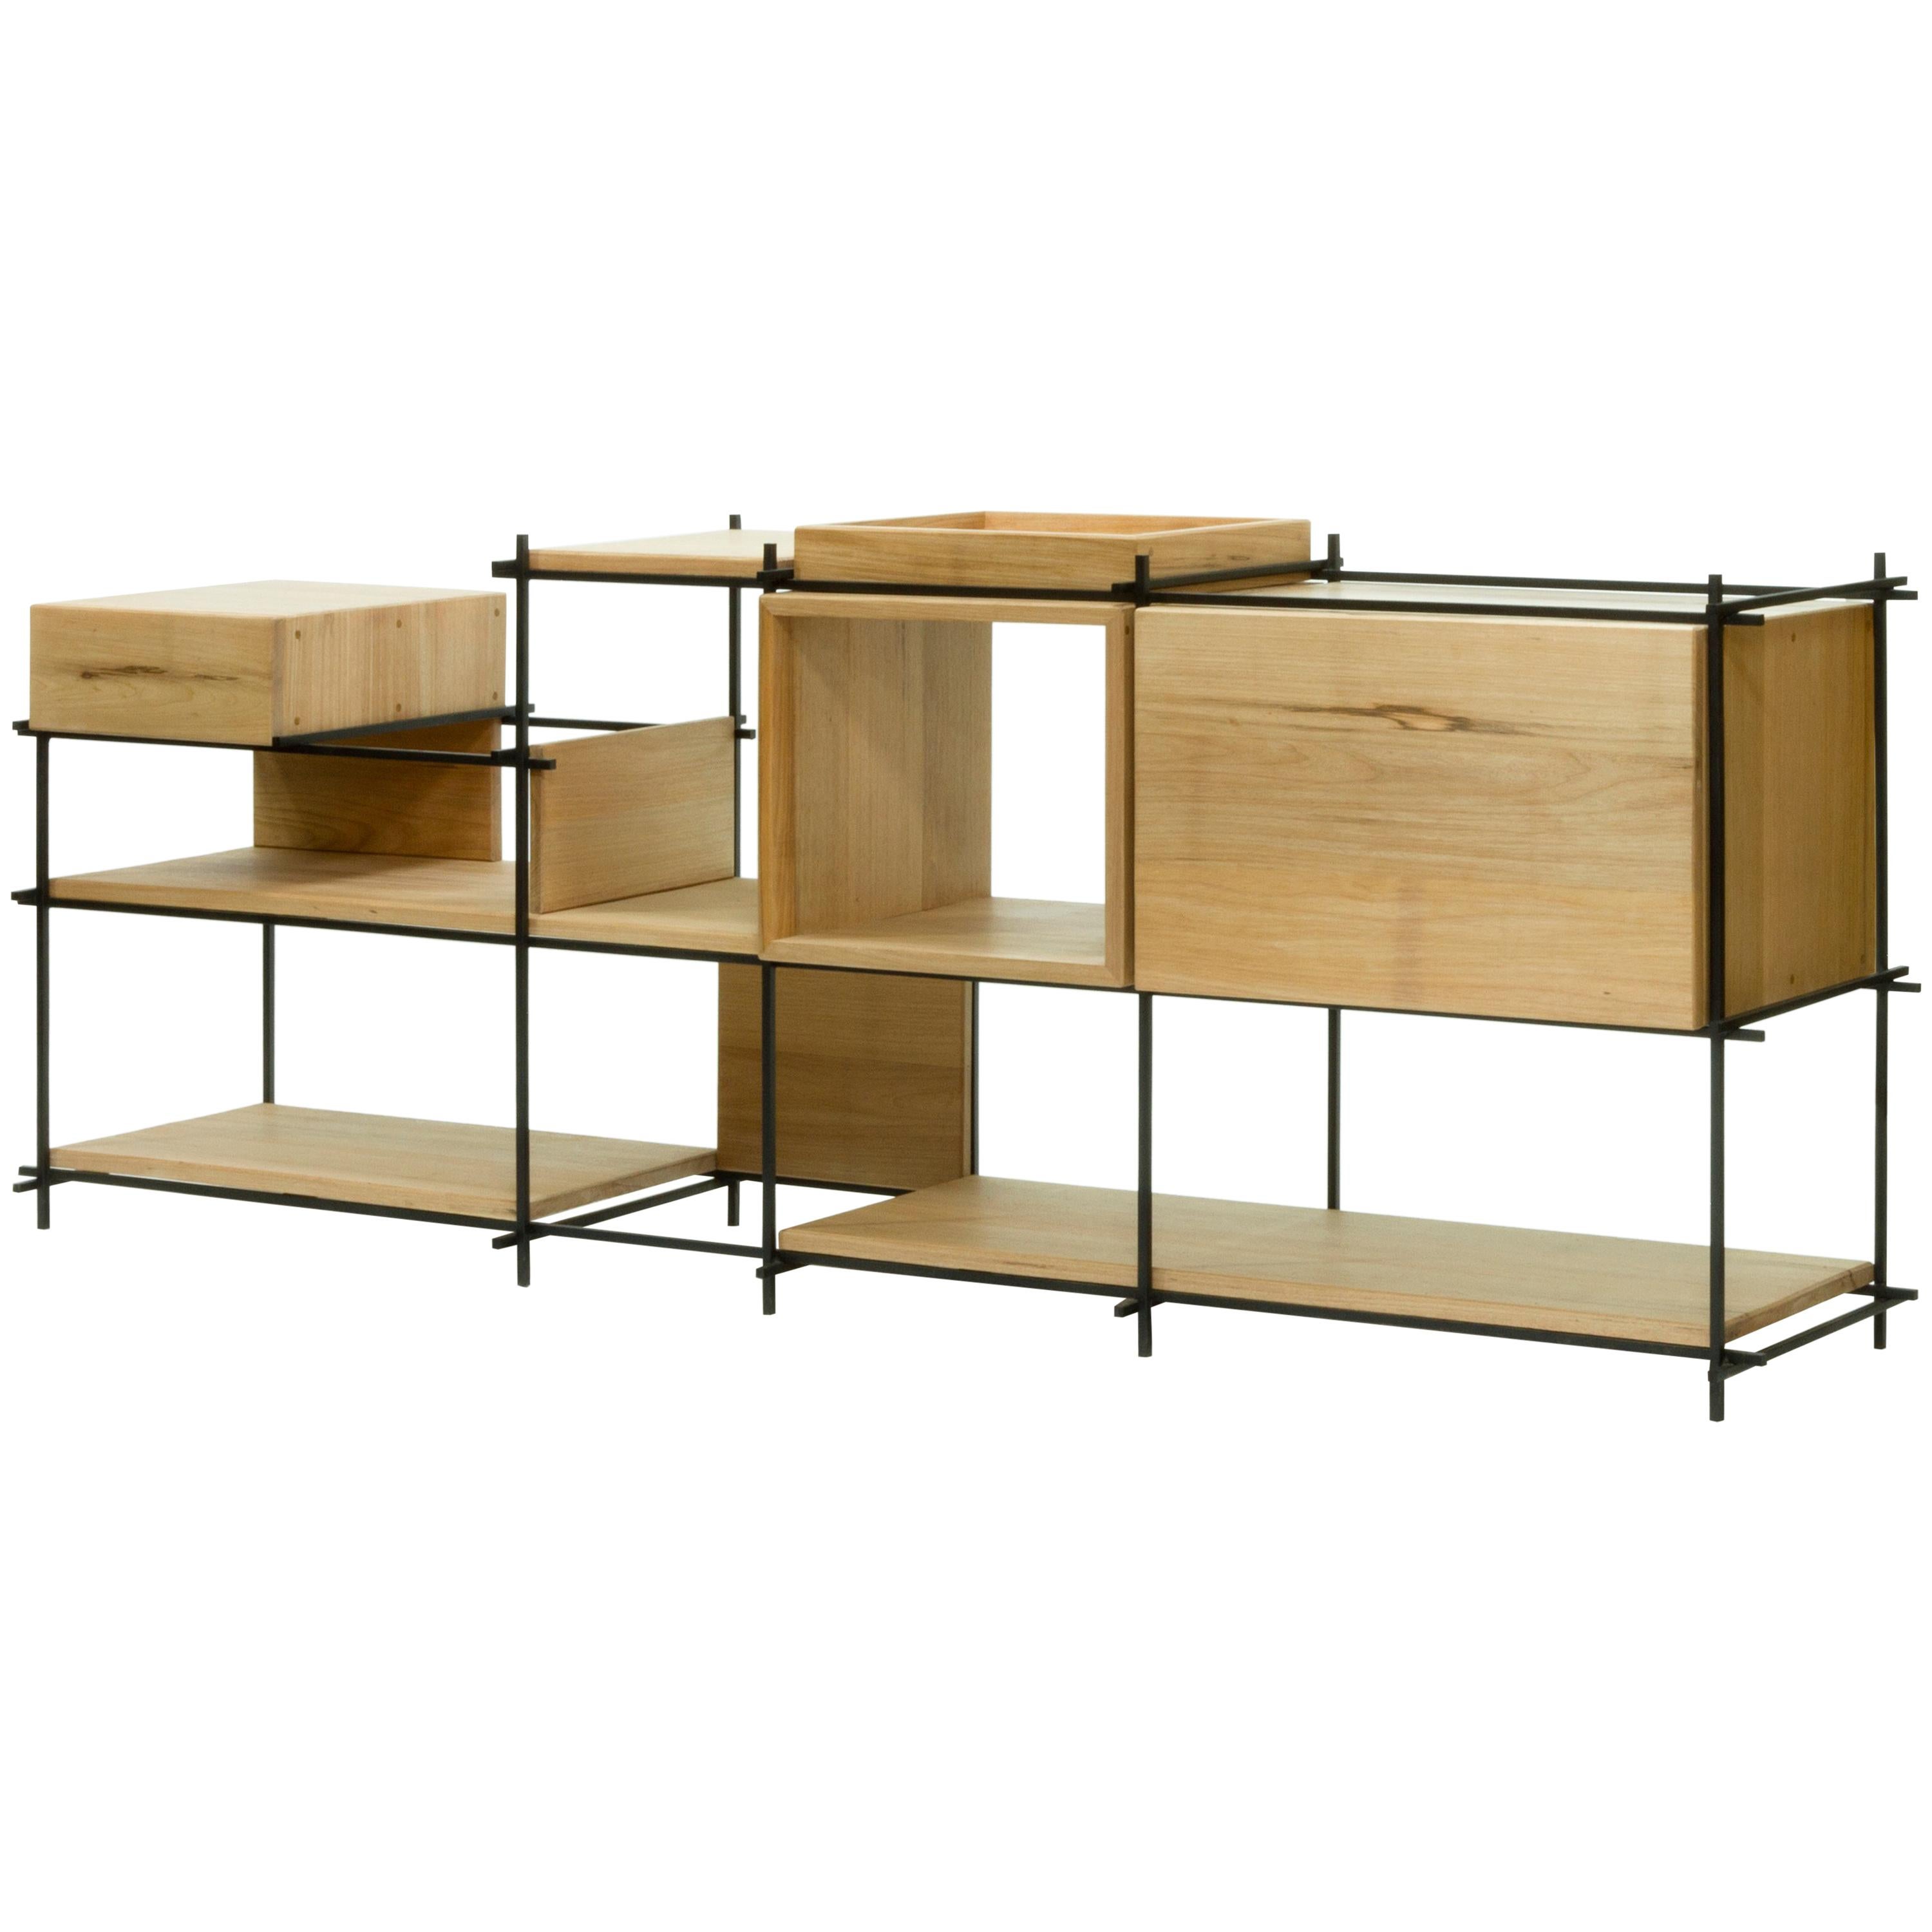 Sideboard in Hardwood and Steel, Brazilian Contemporary Design by O Formigueiro For Sale